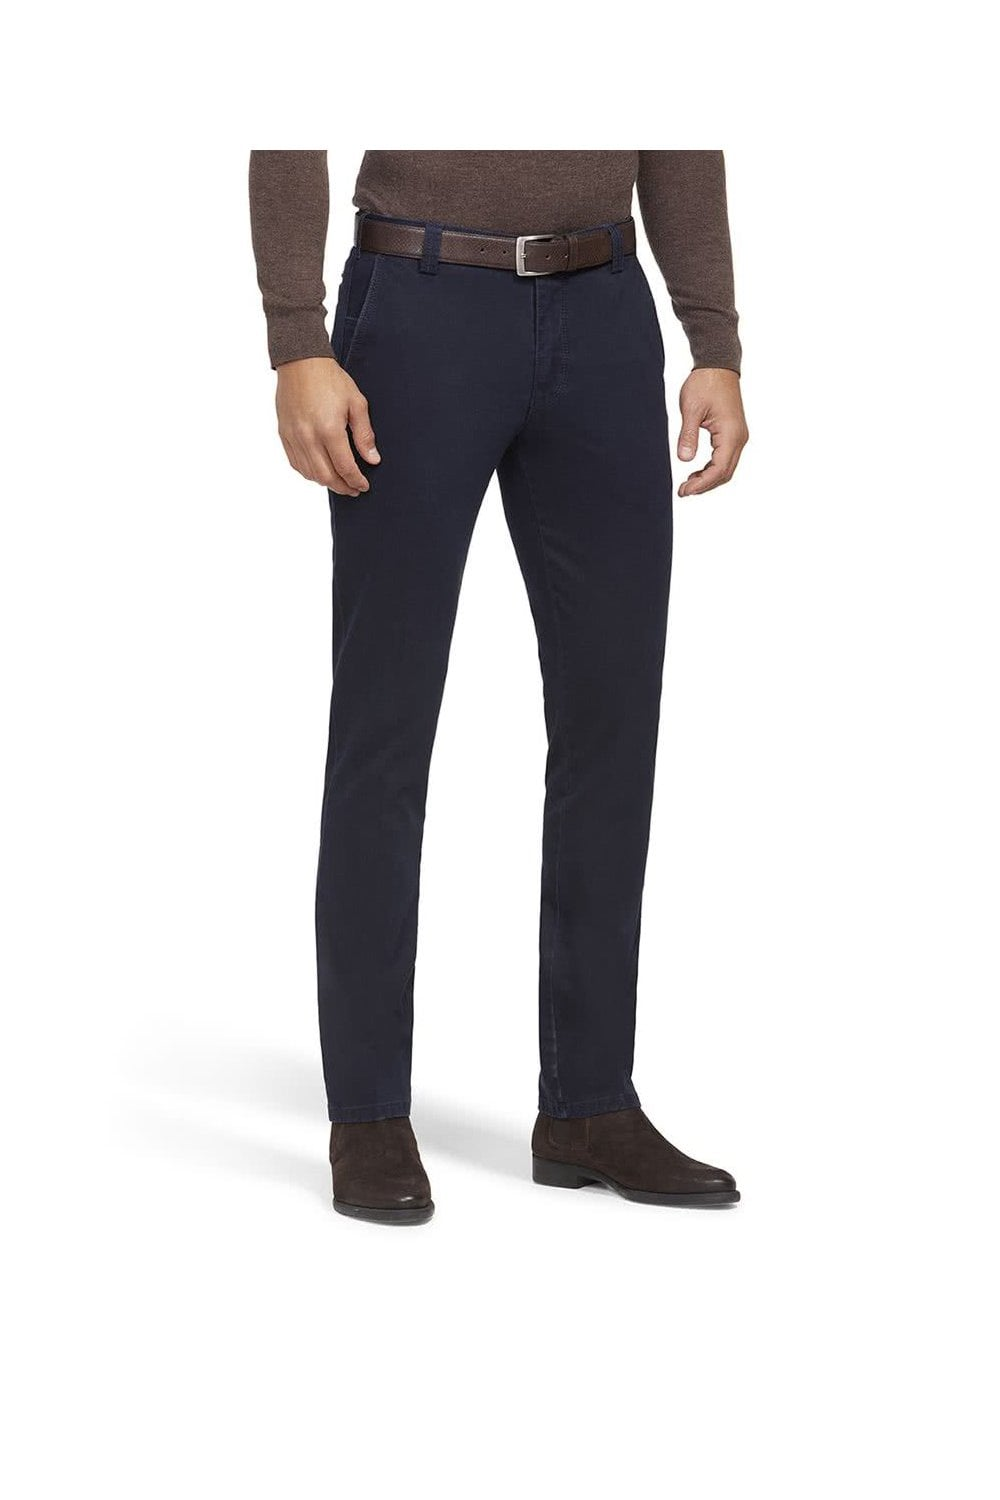 Meyer New York Trousers - Navy - Ruffords Country Store